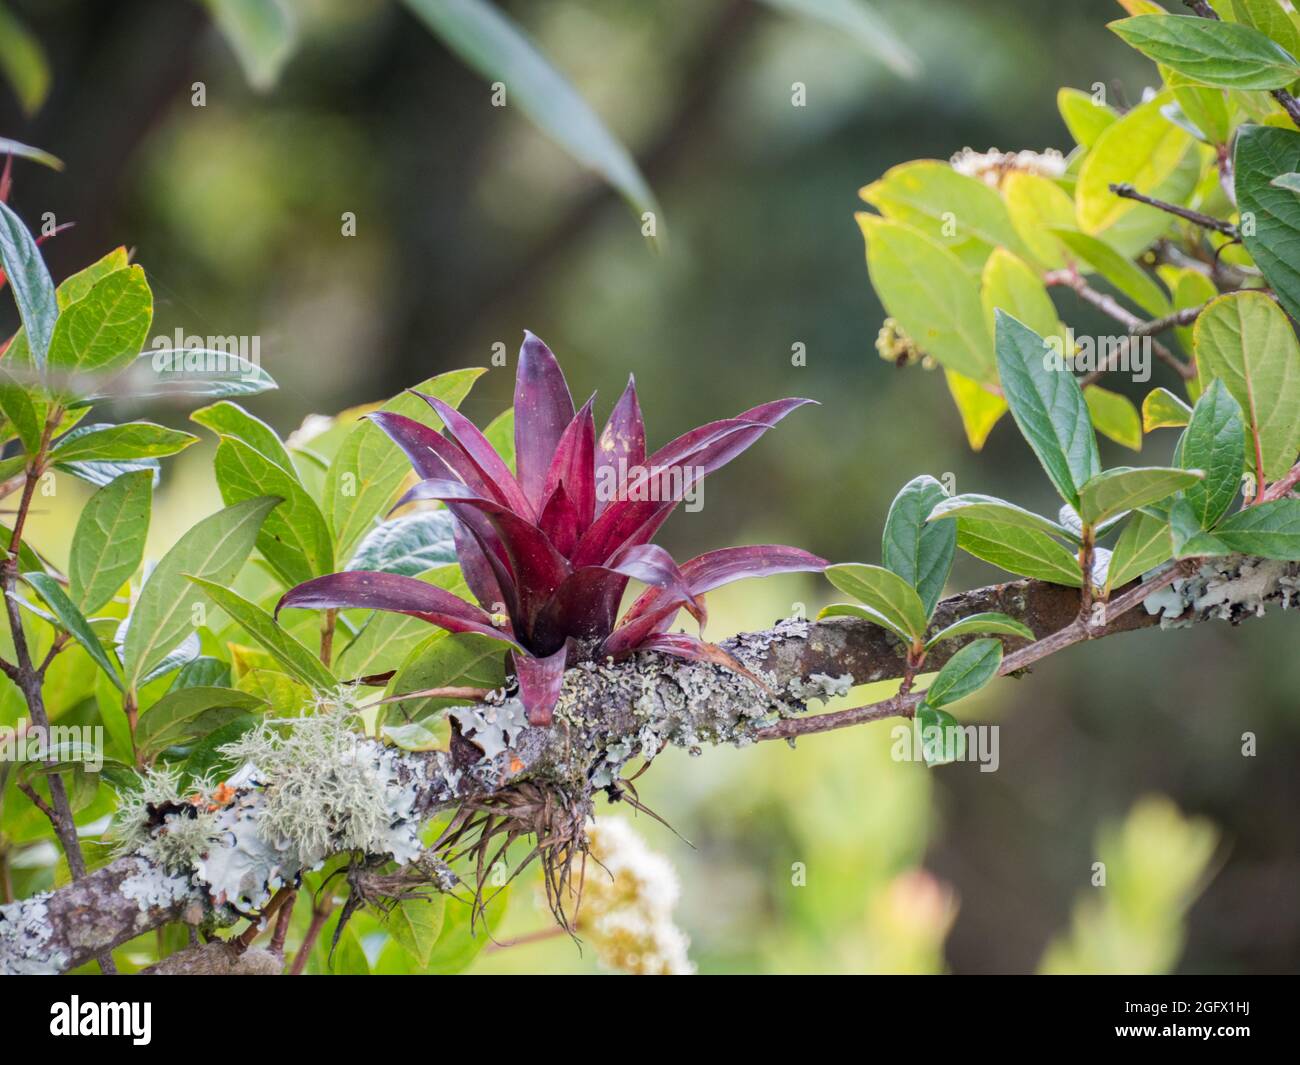 Branches of trees covered with red bromeliad and lichen found in Bogota on the Monserrate Hill. Bromeliads are plants that are adapted to different cl Stock Photo